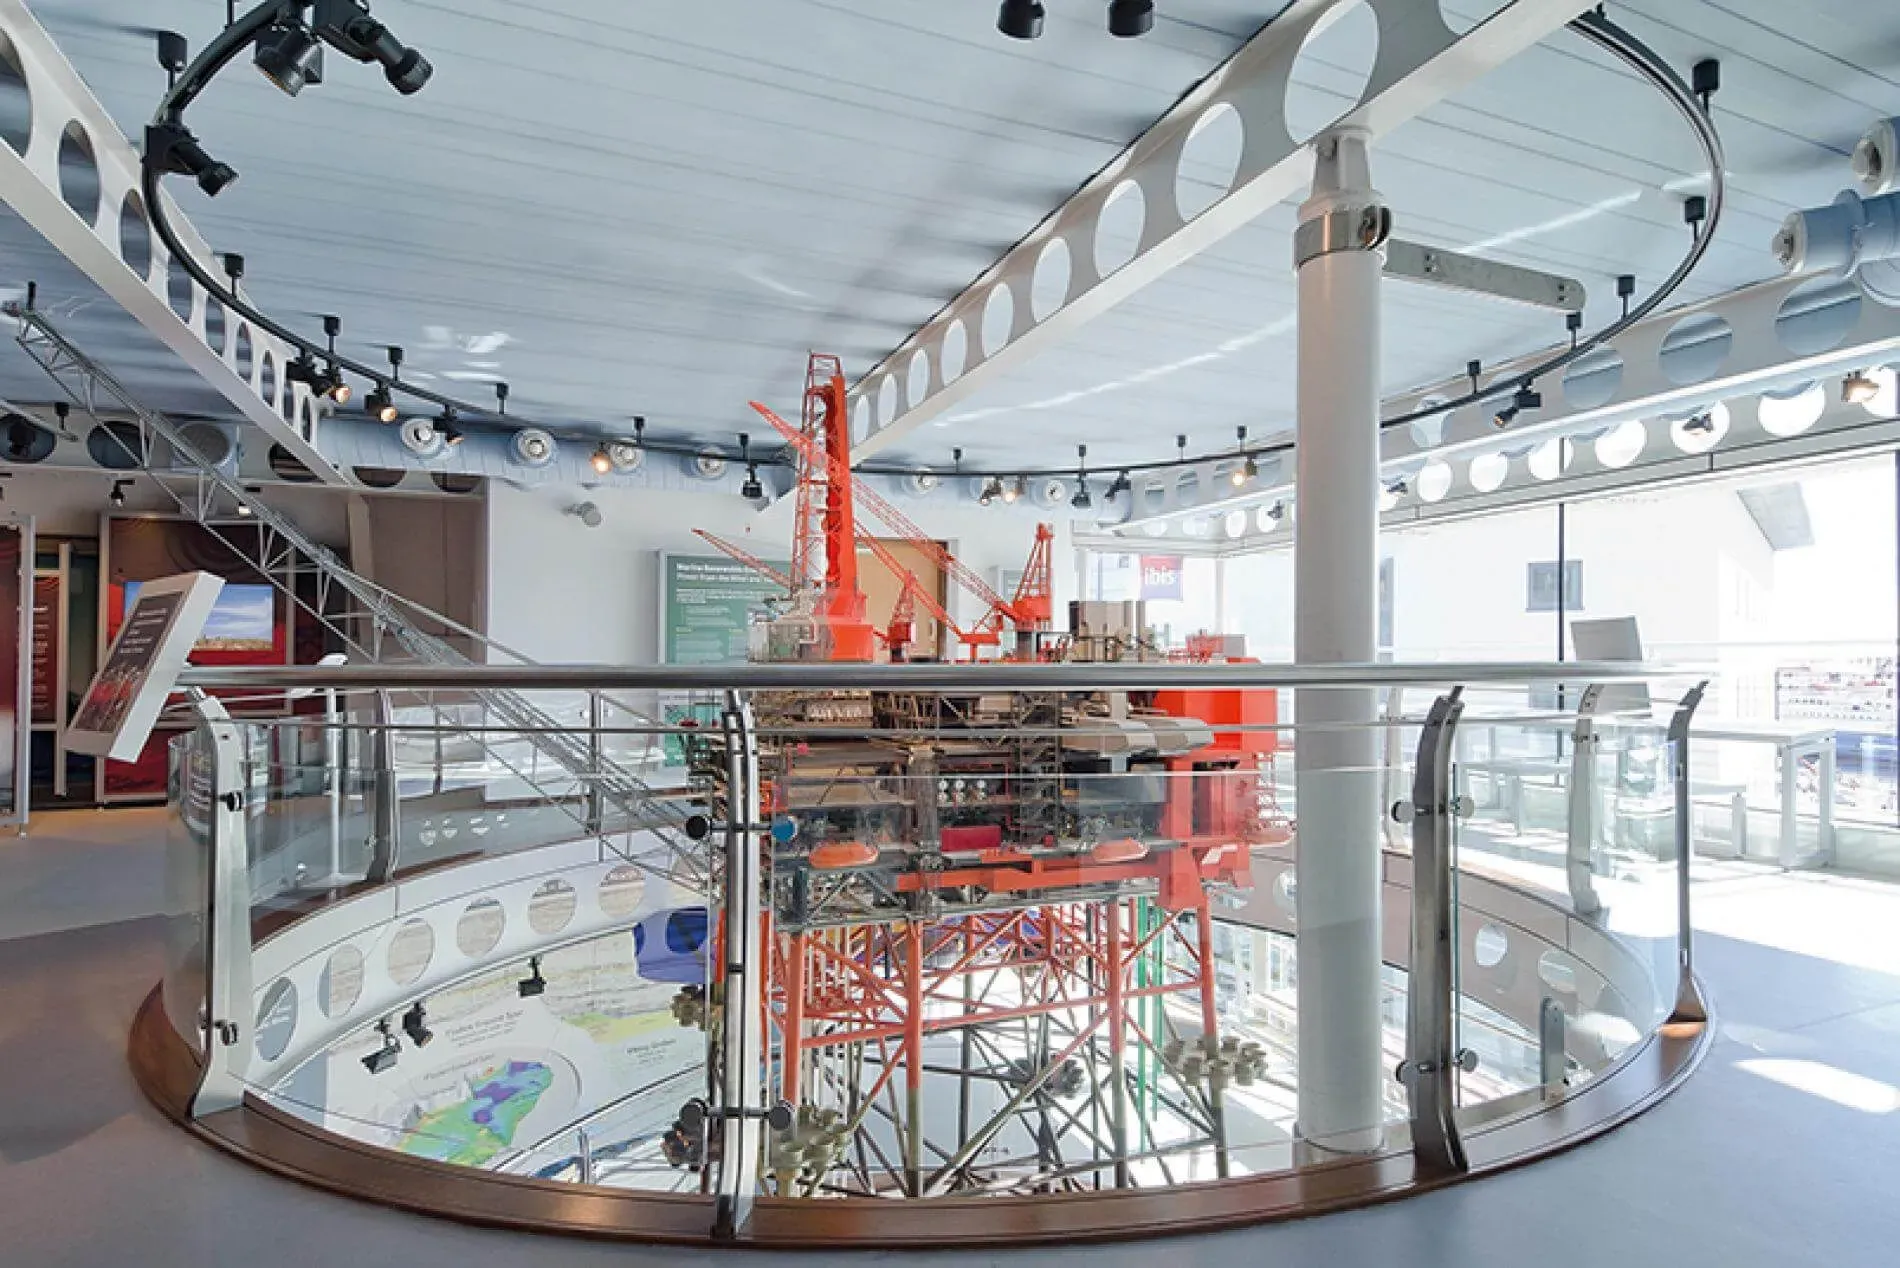 The oil rig goes up the centre of the museum and is a central point.